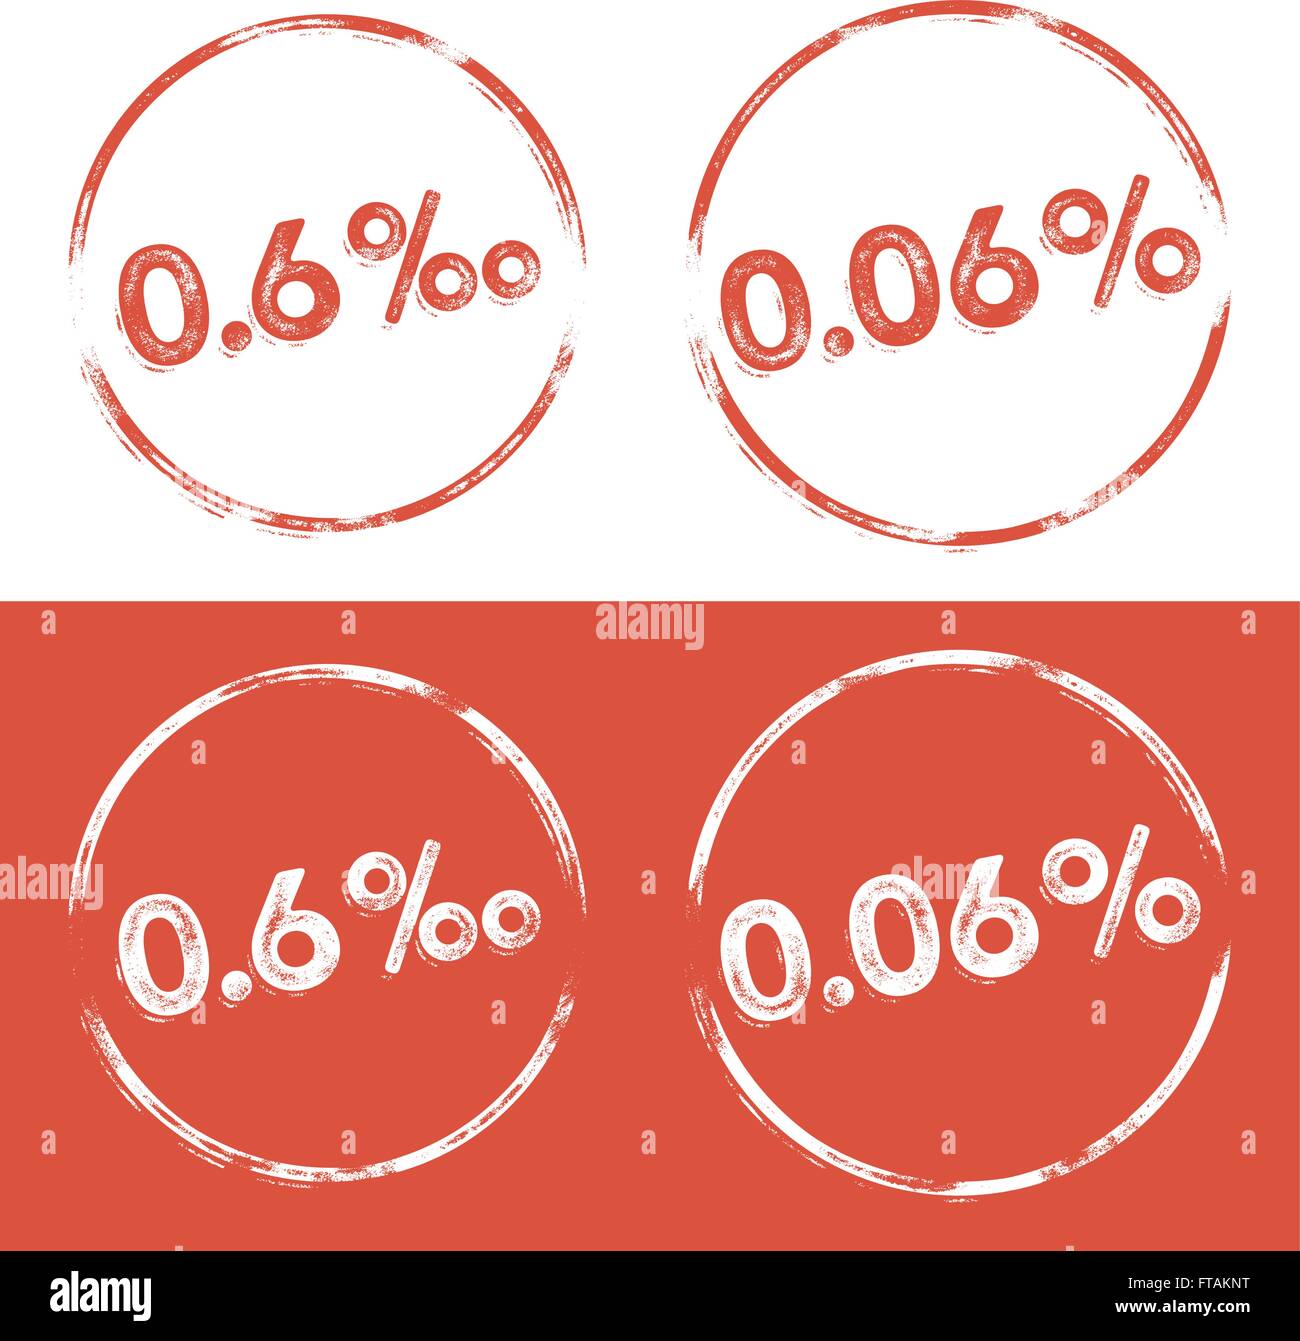 Per mille and percent illustration (0.6 ‰ and 0.06 %) in a grungy,  letterpress look in the range of blood alcohol limit and law Stock Vector  Image & Art - Alamy